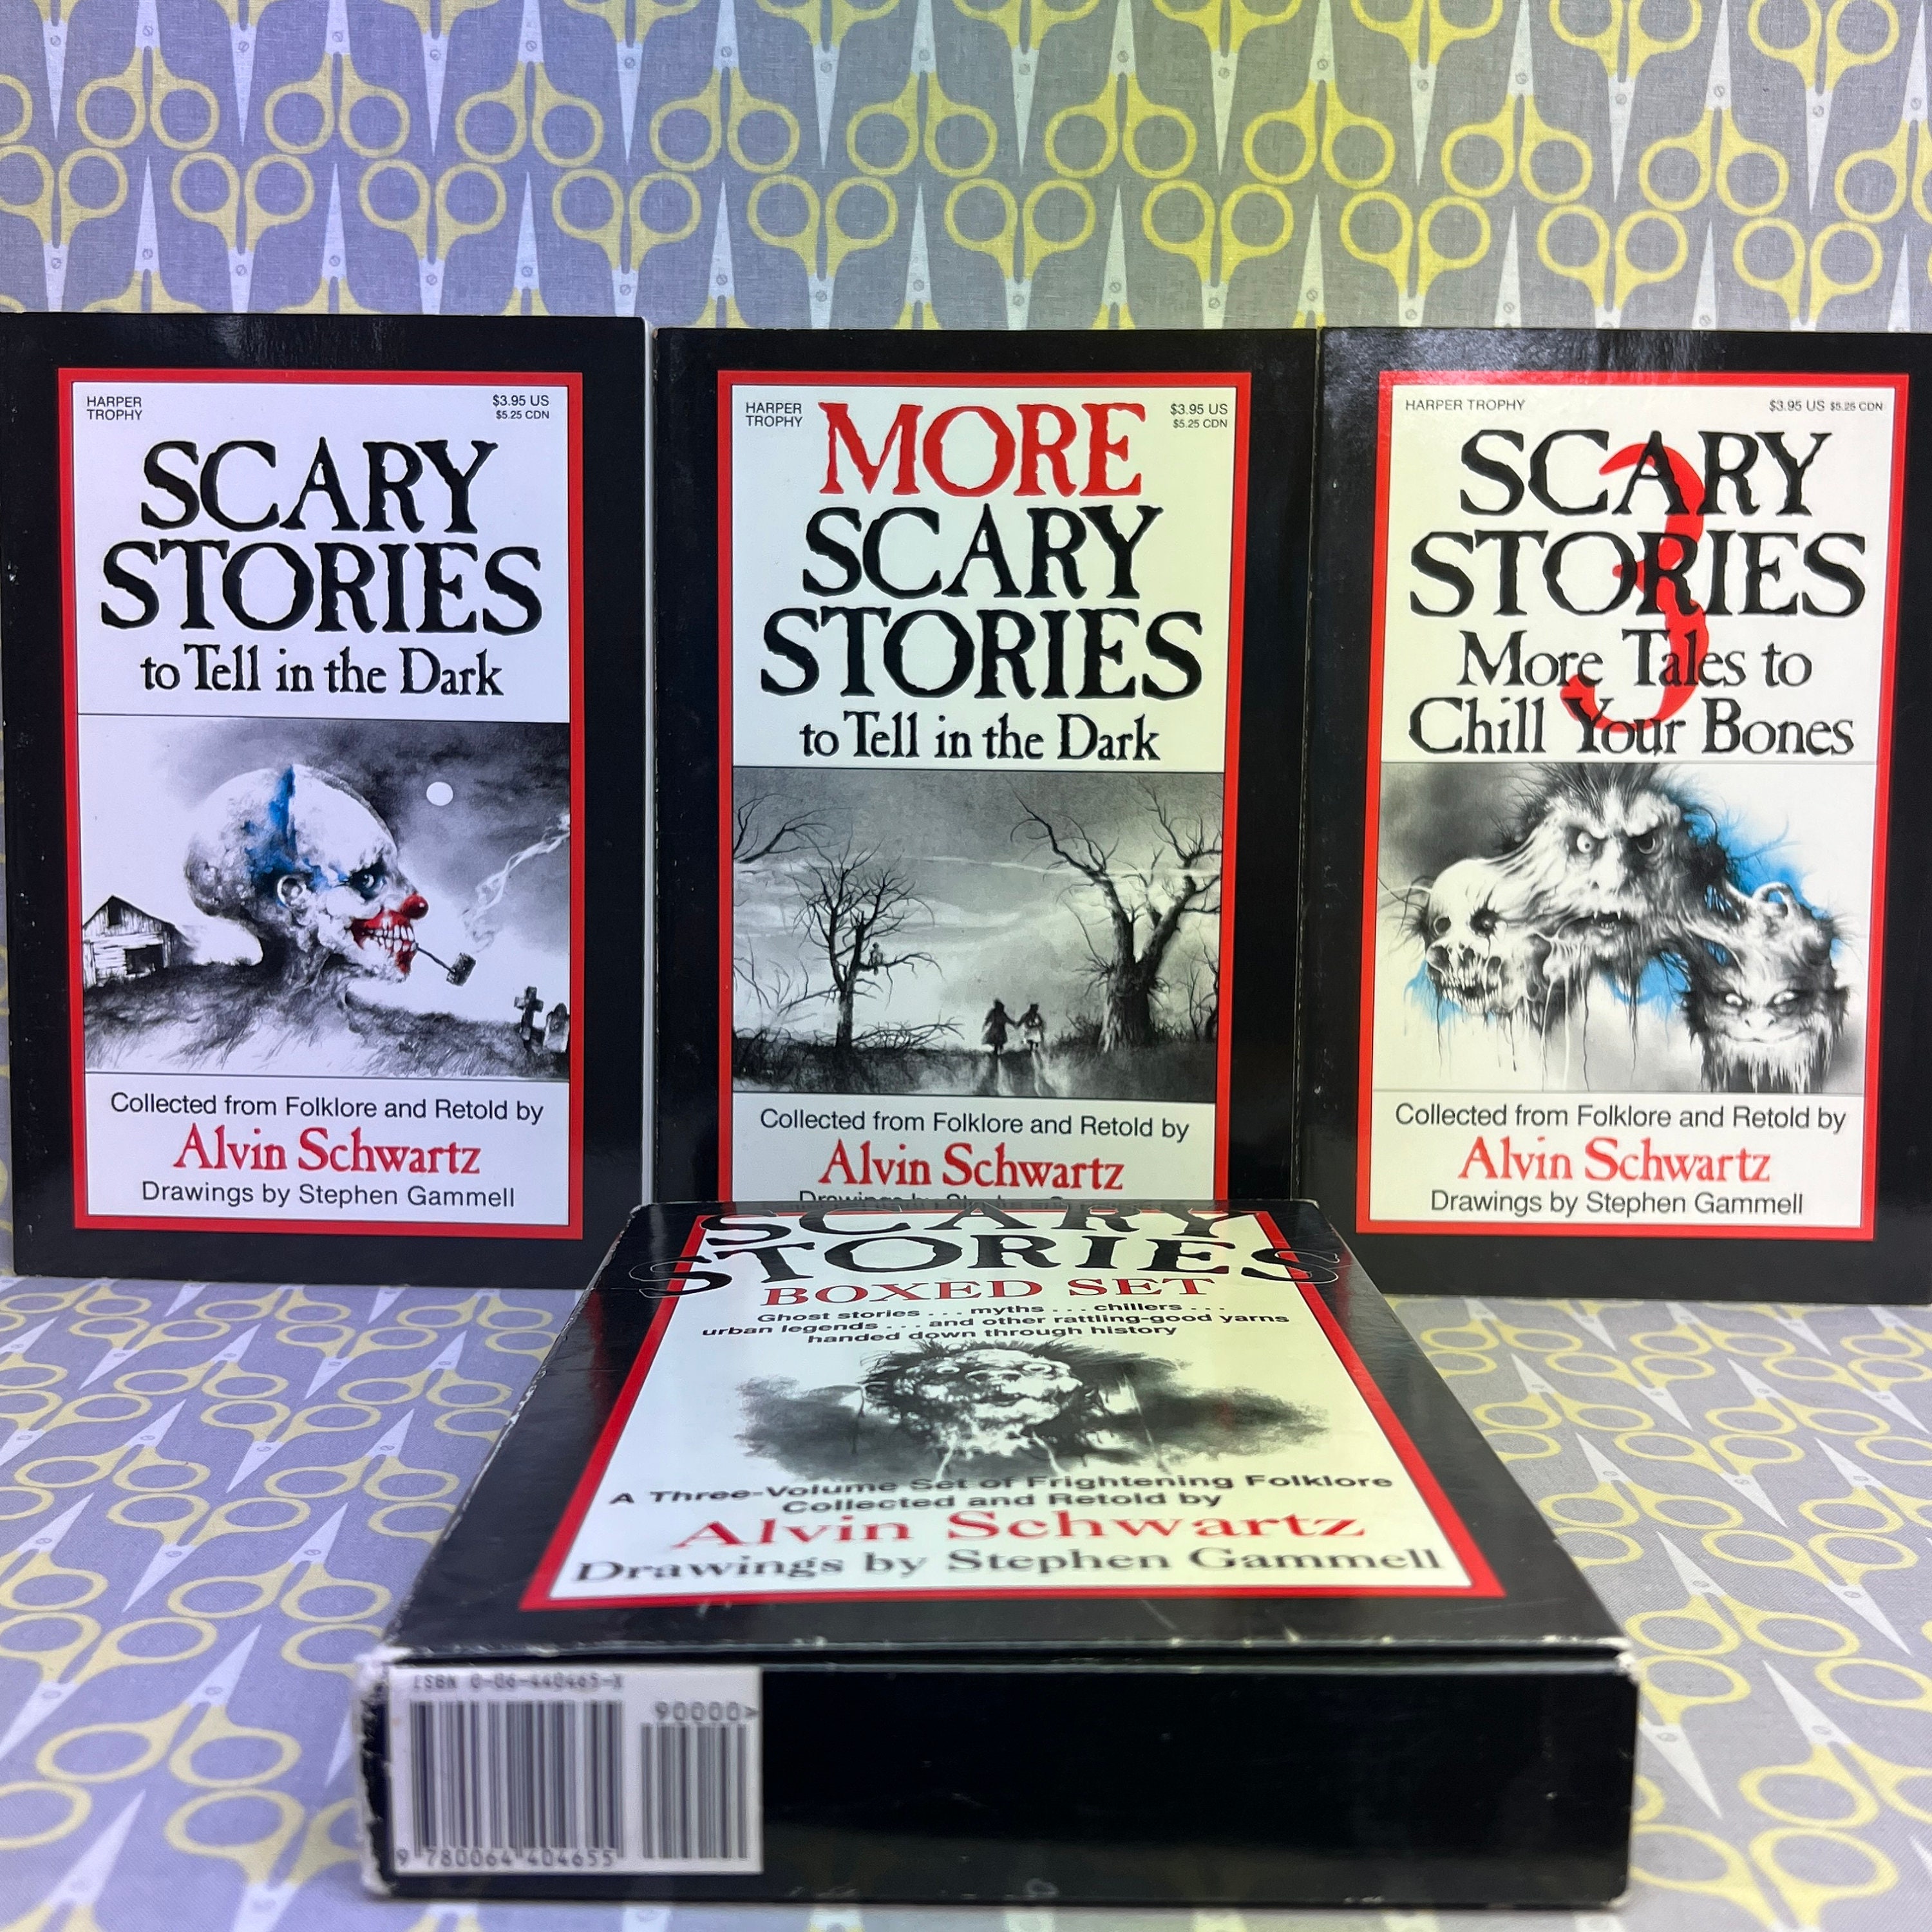 Scary Stories to Tell in the Dark Boxed Set by Alvin Schwartz pic